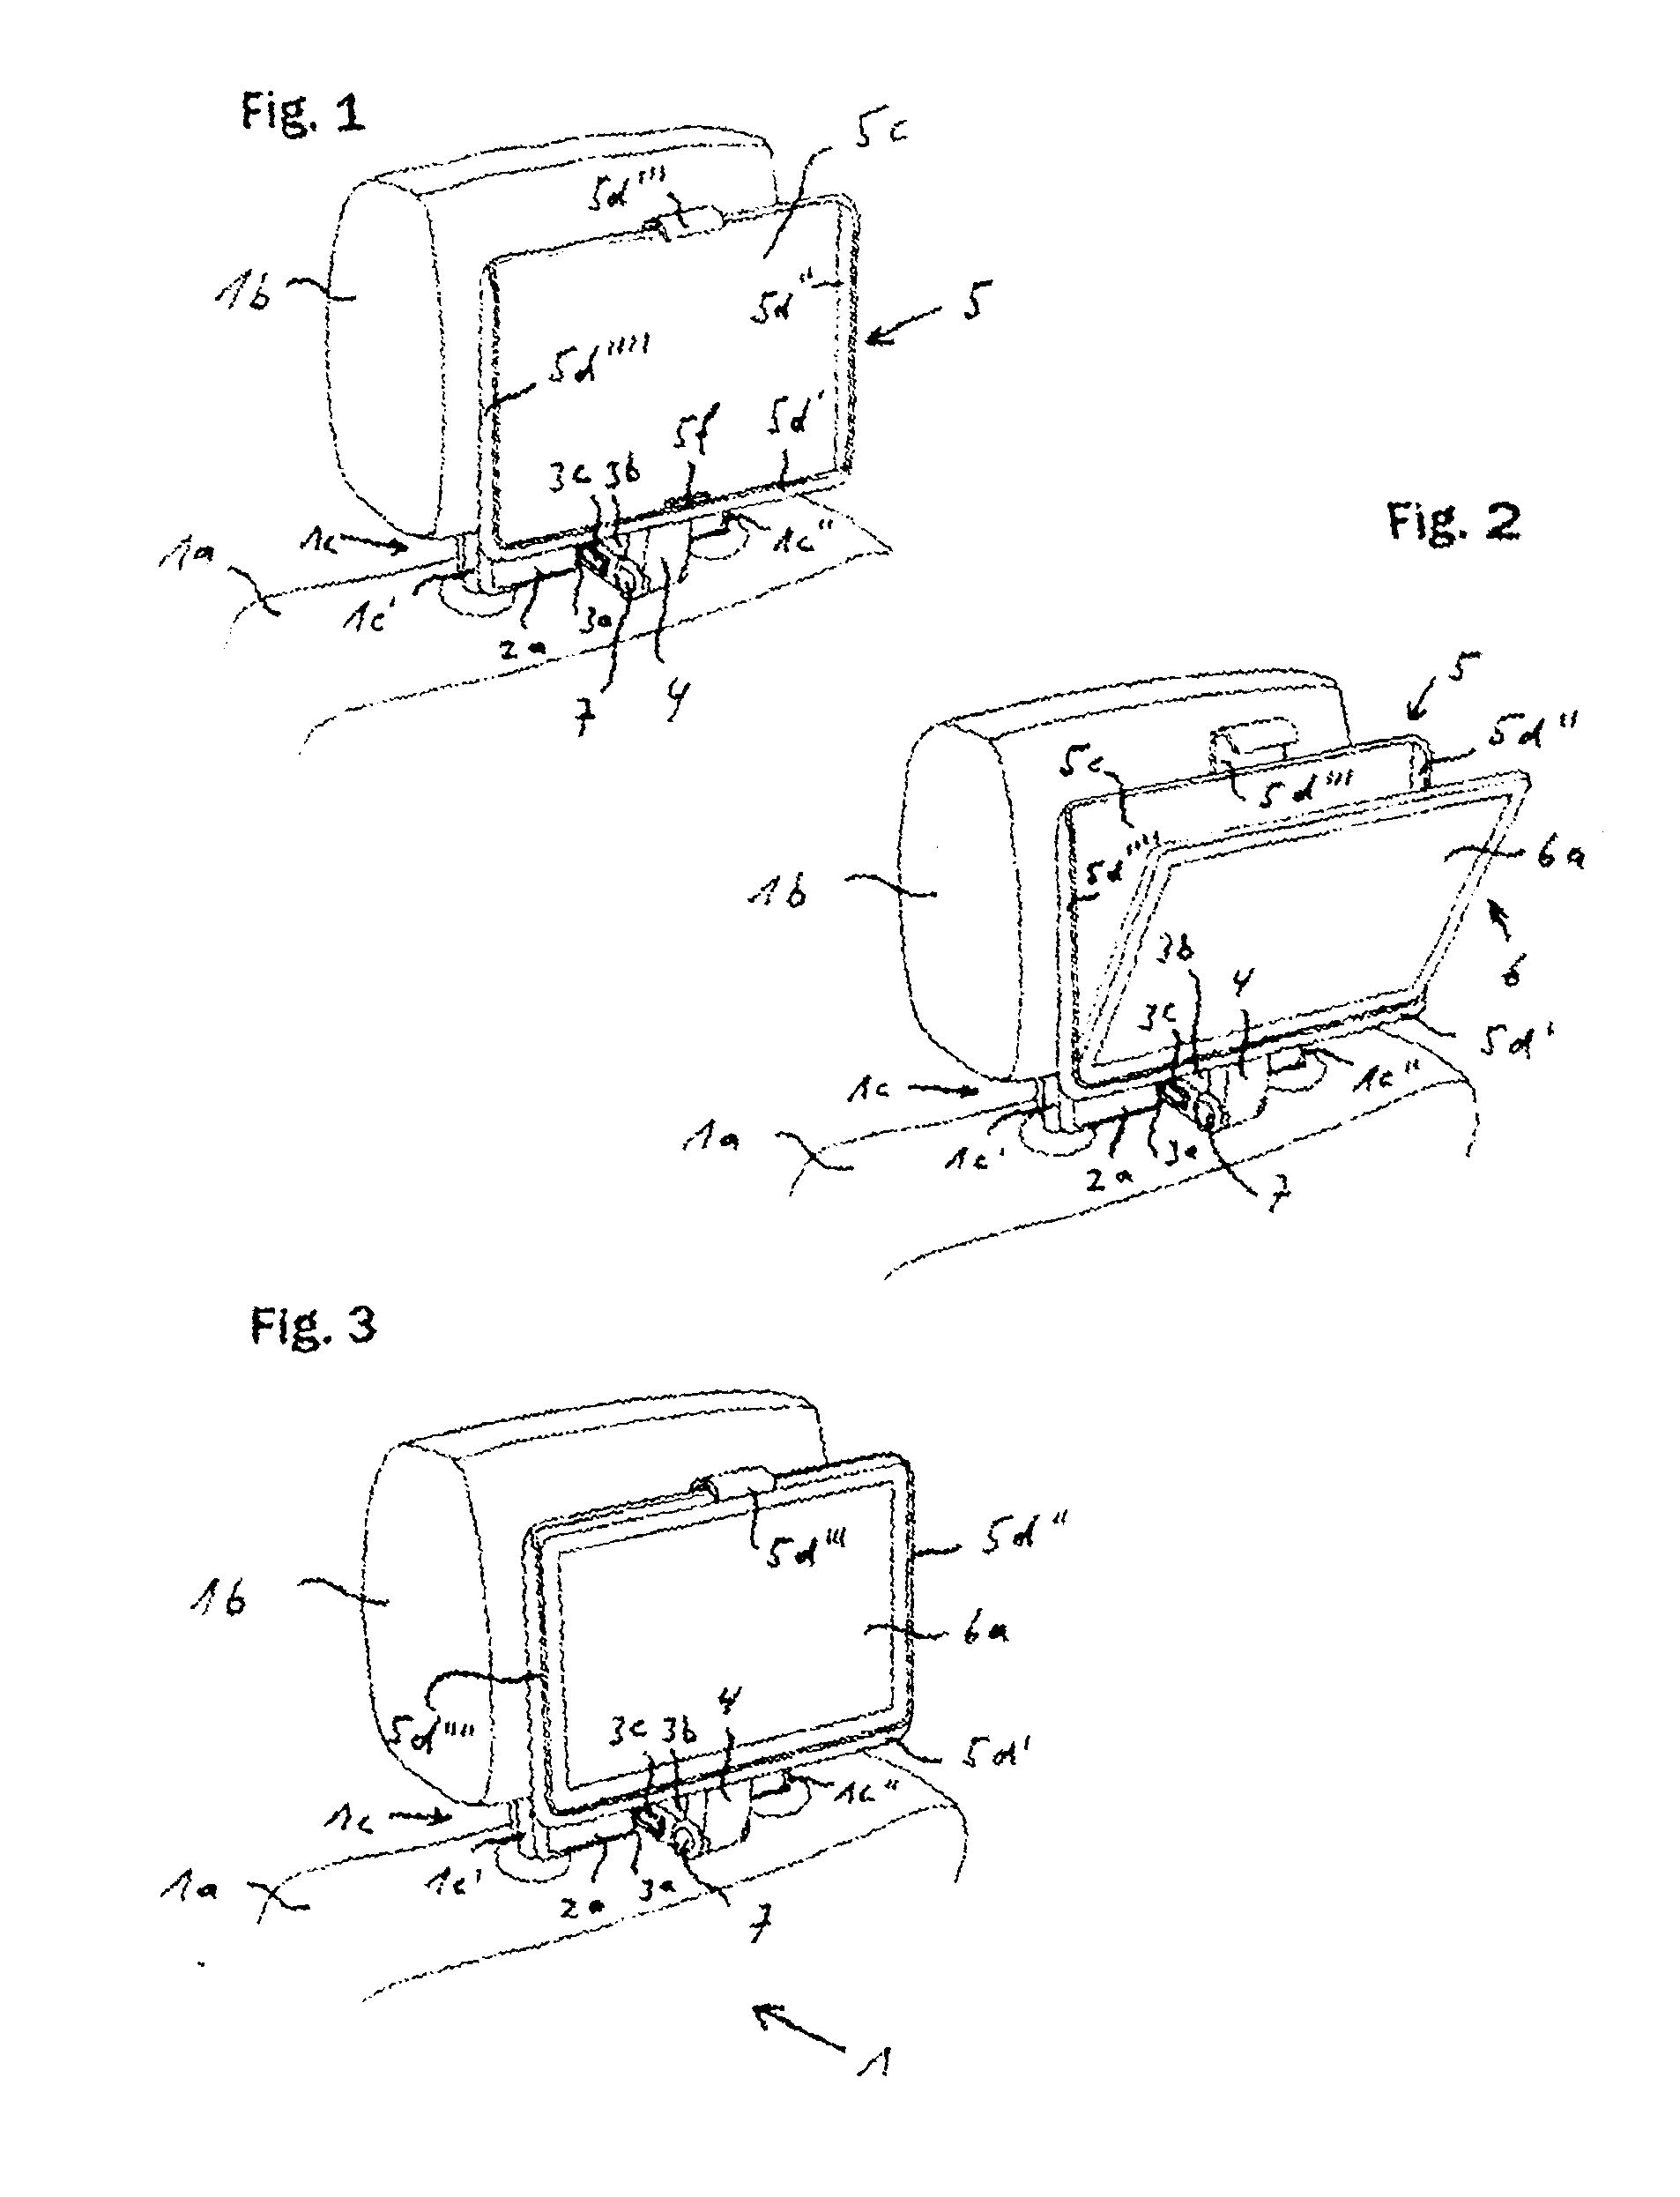 Device for attaching a tablet computer